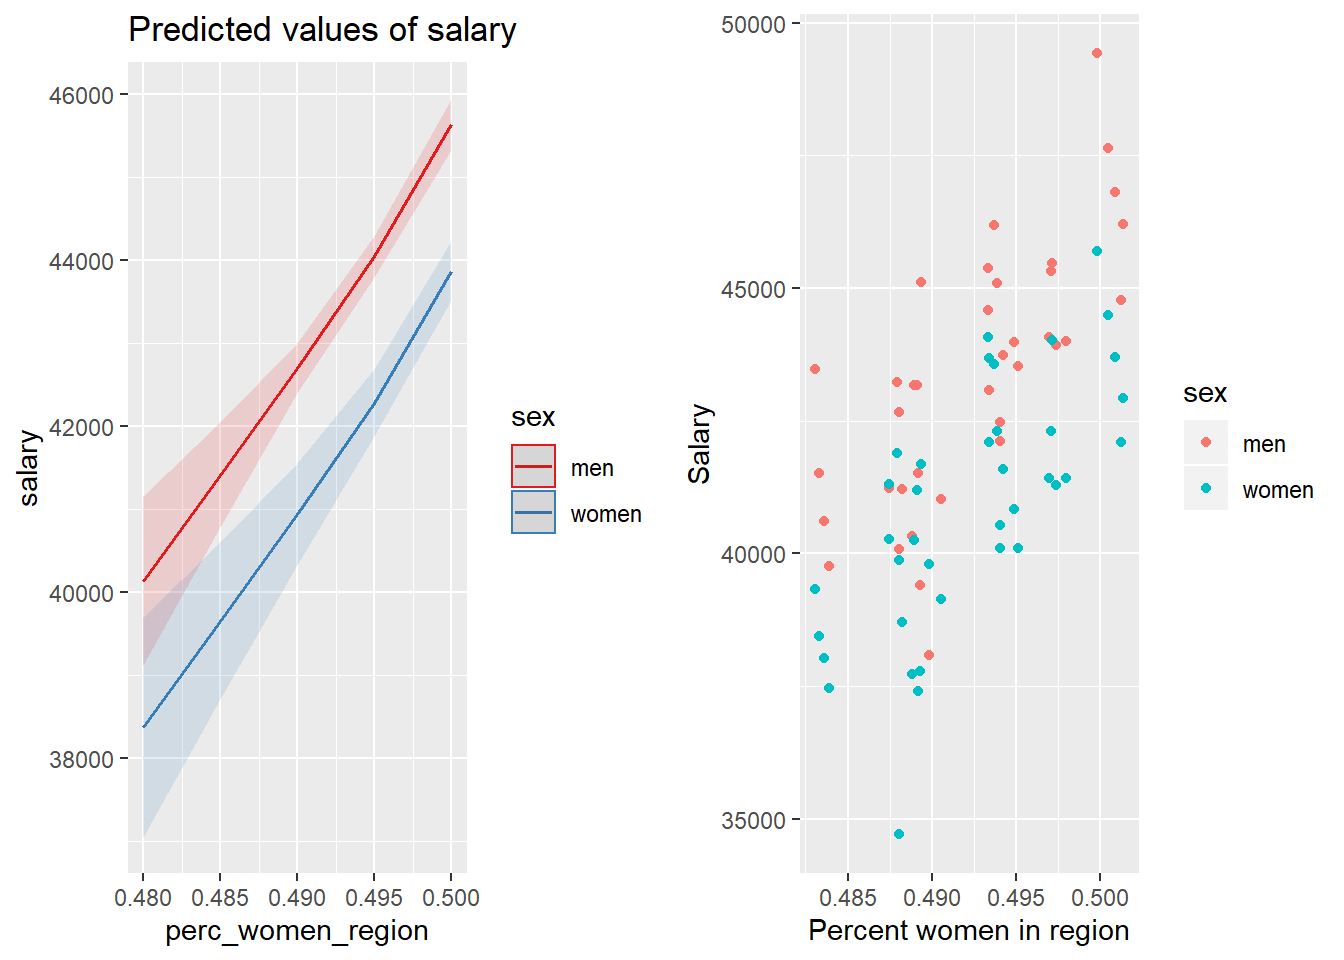 The combination of the per cent women in the region and sex on the salary for engineers, Year 2014 - 2018